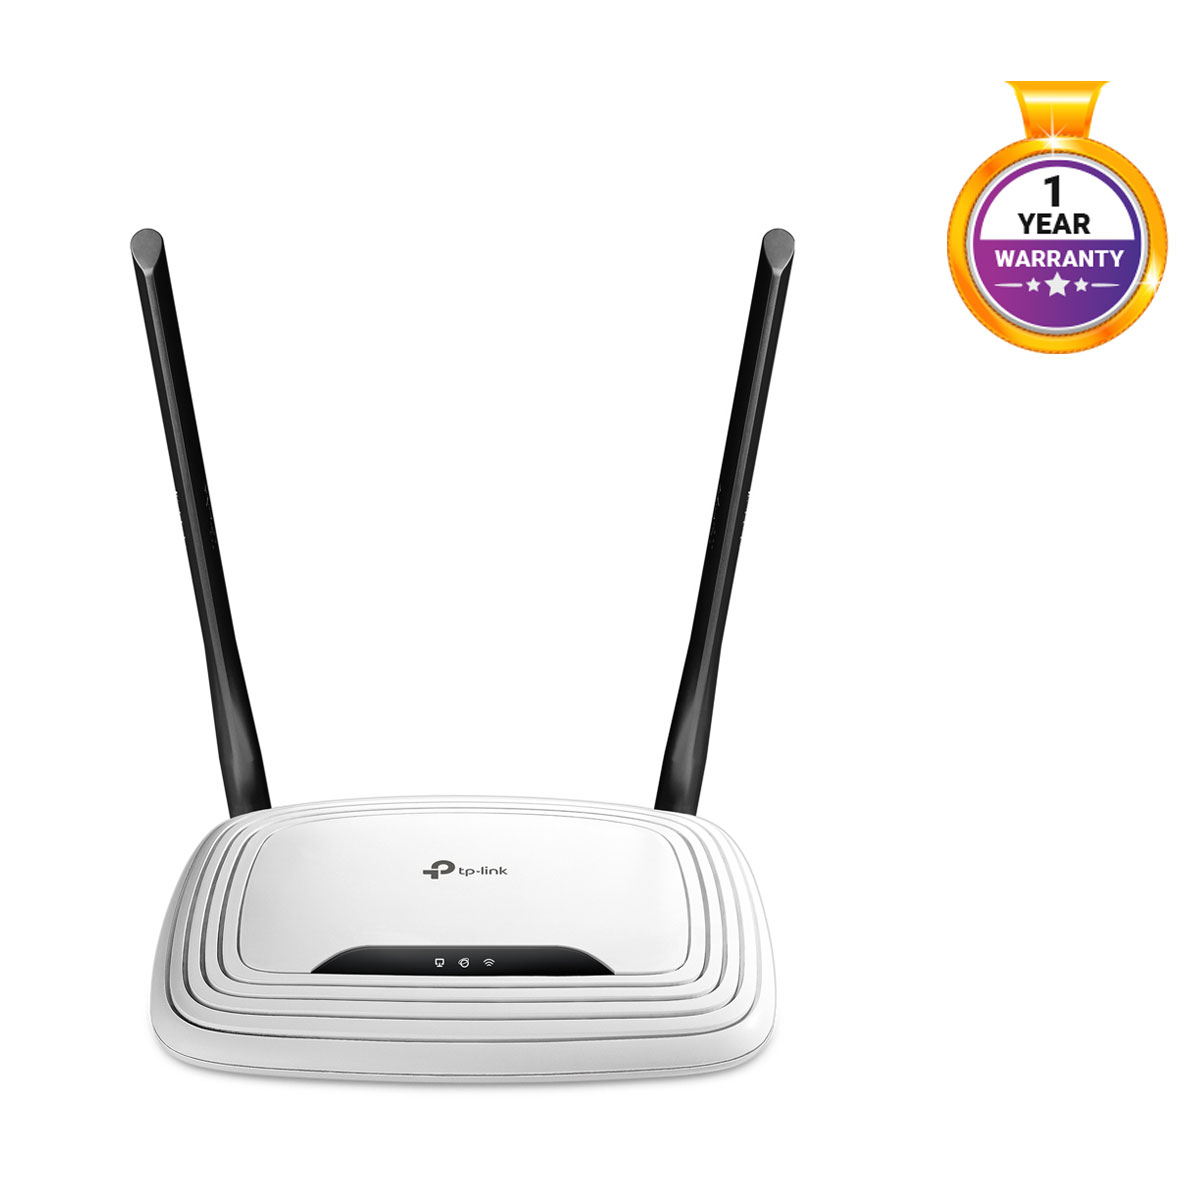 TP-Link TL-WR841N 300Mbps Wireless N Router - White